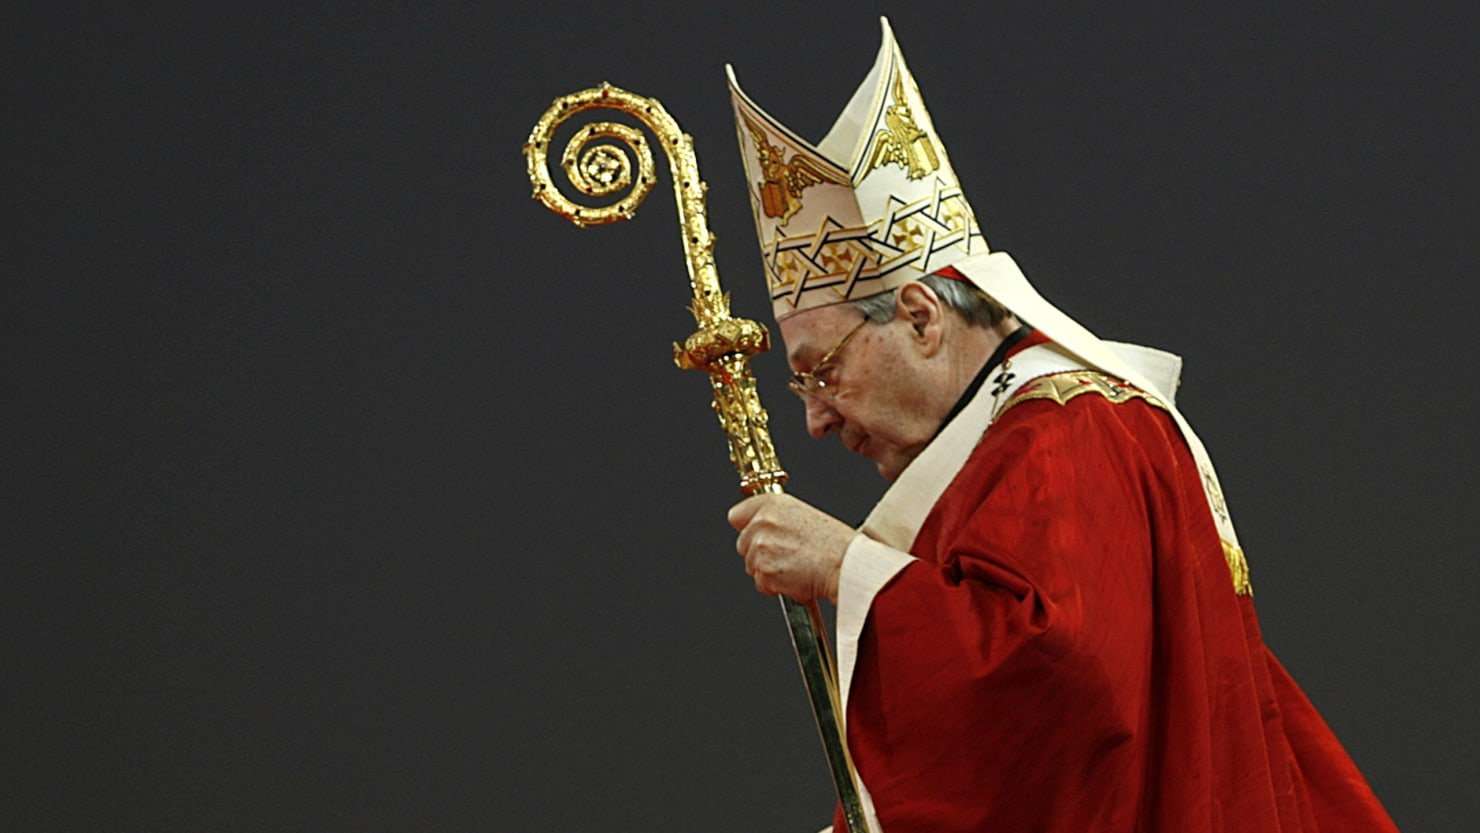 image for Vatican No. 3 Cardinal George Pell Convicted on Charges He Sexually Abused Choir Boys